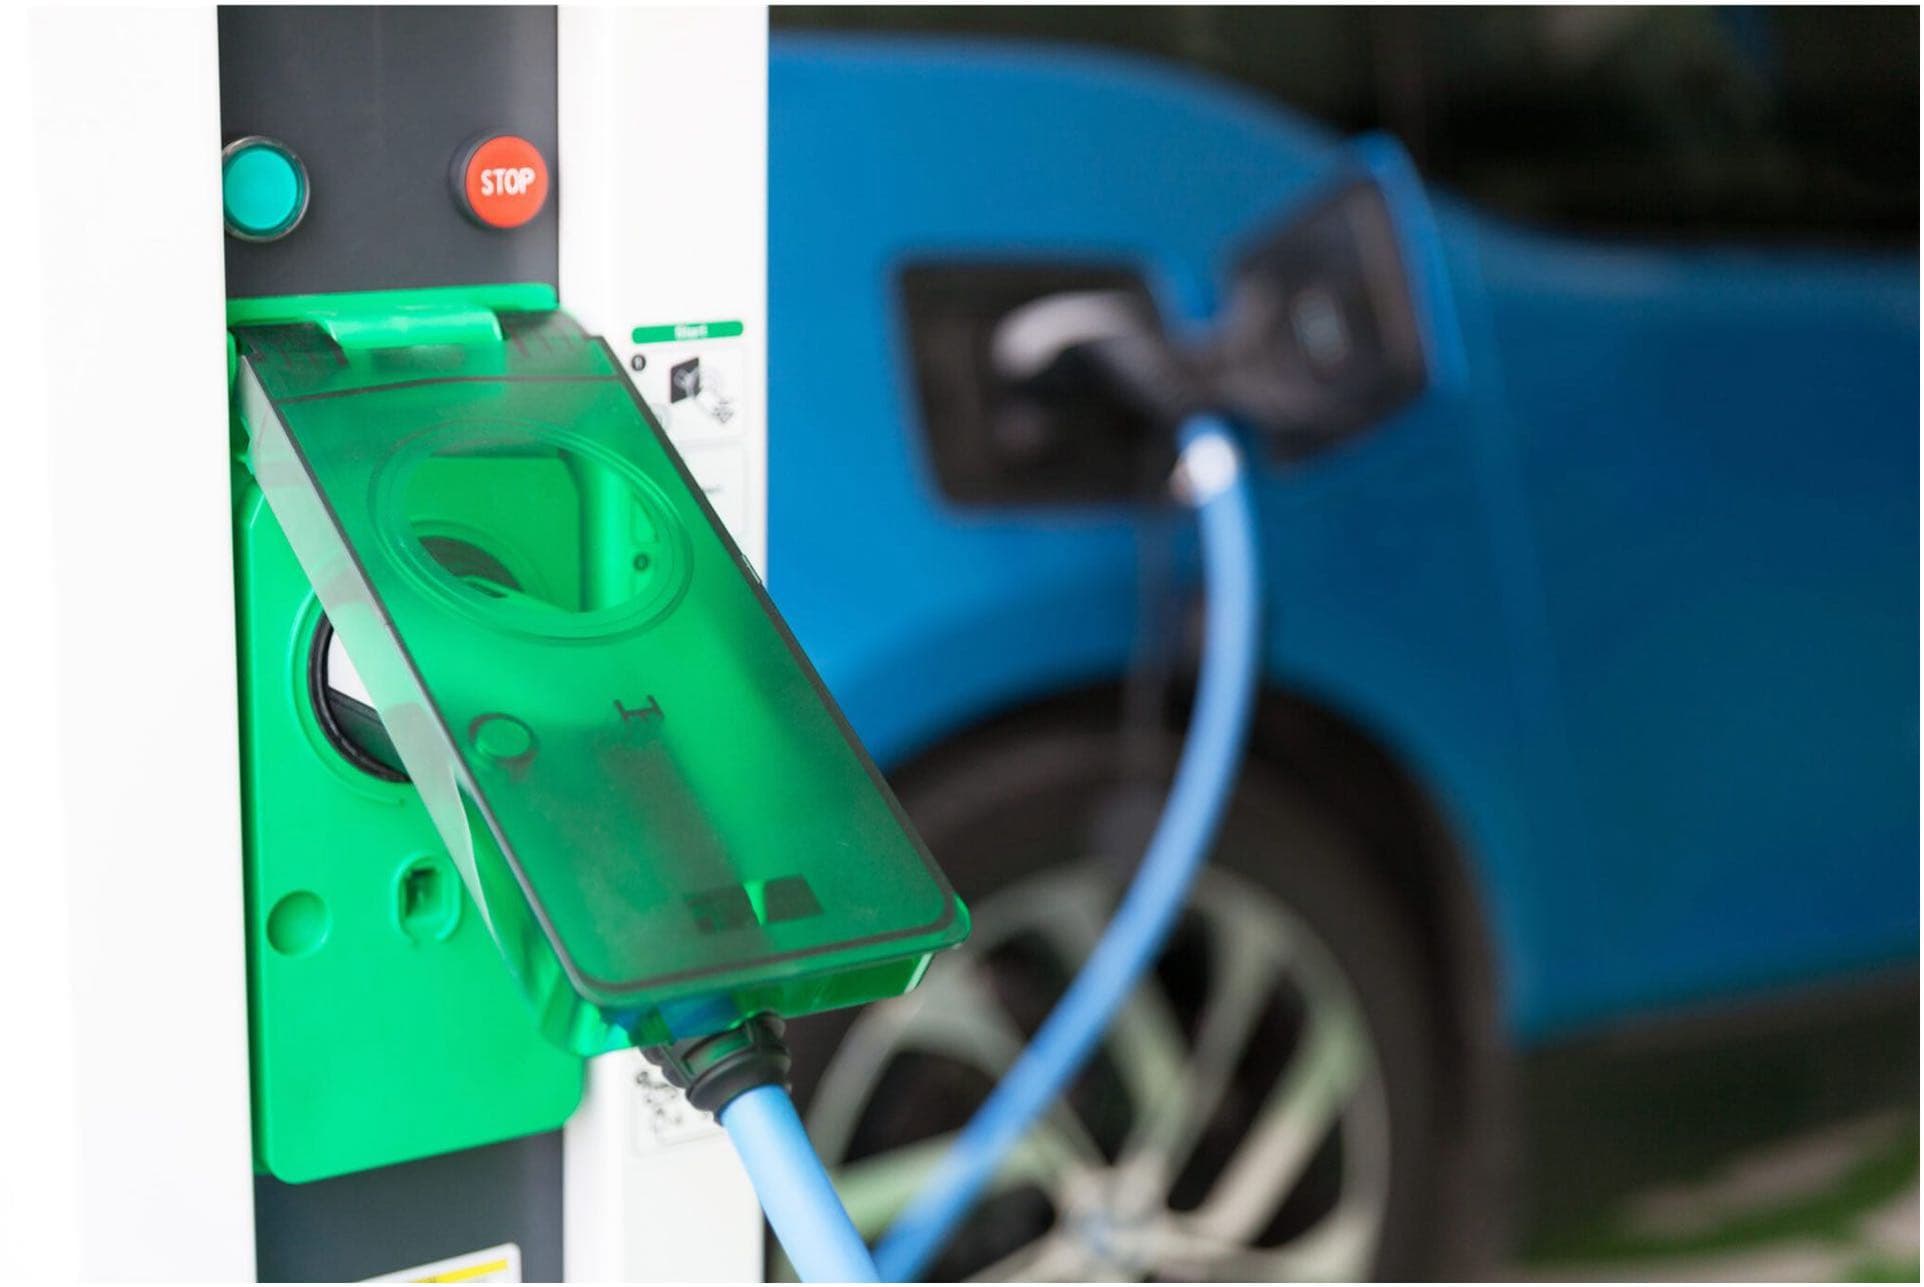 ev-charger-installer-near-me-rebate-opportunities-prairie-electric